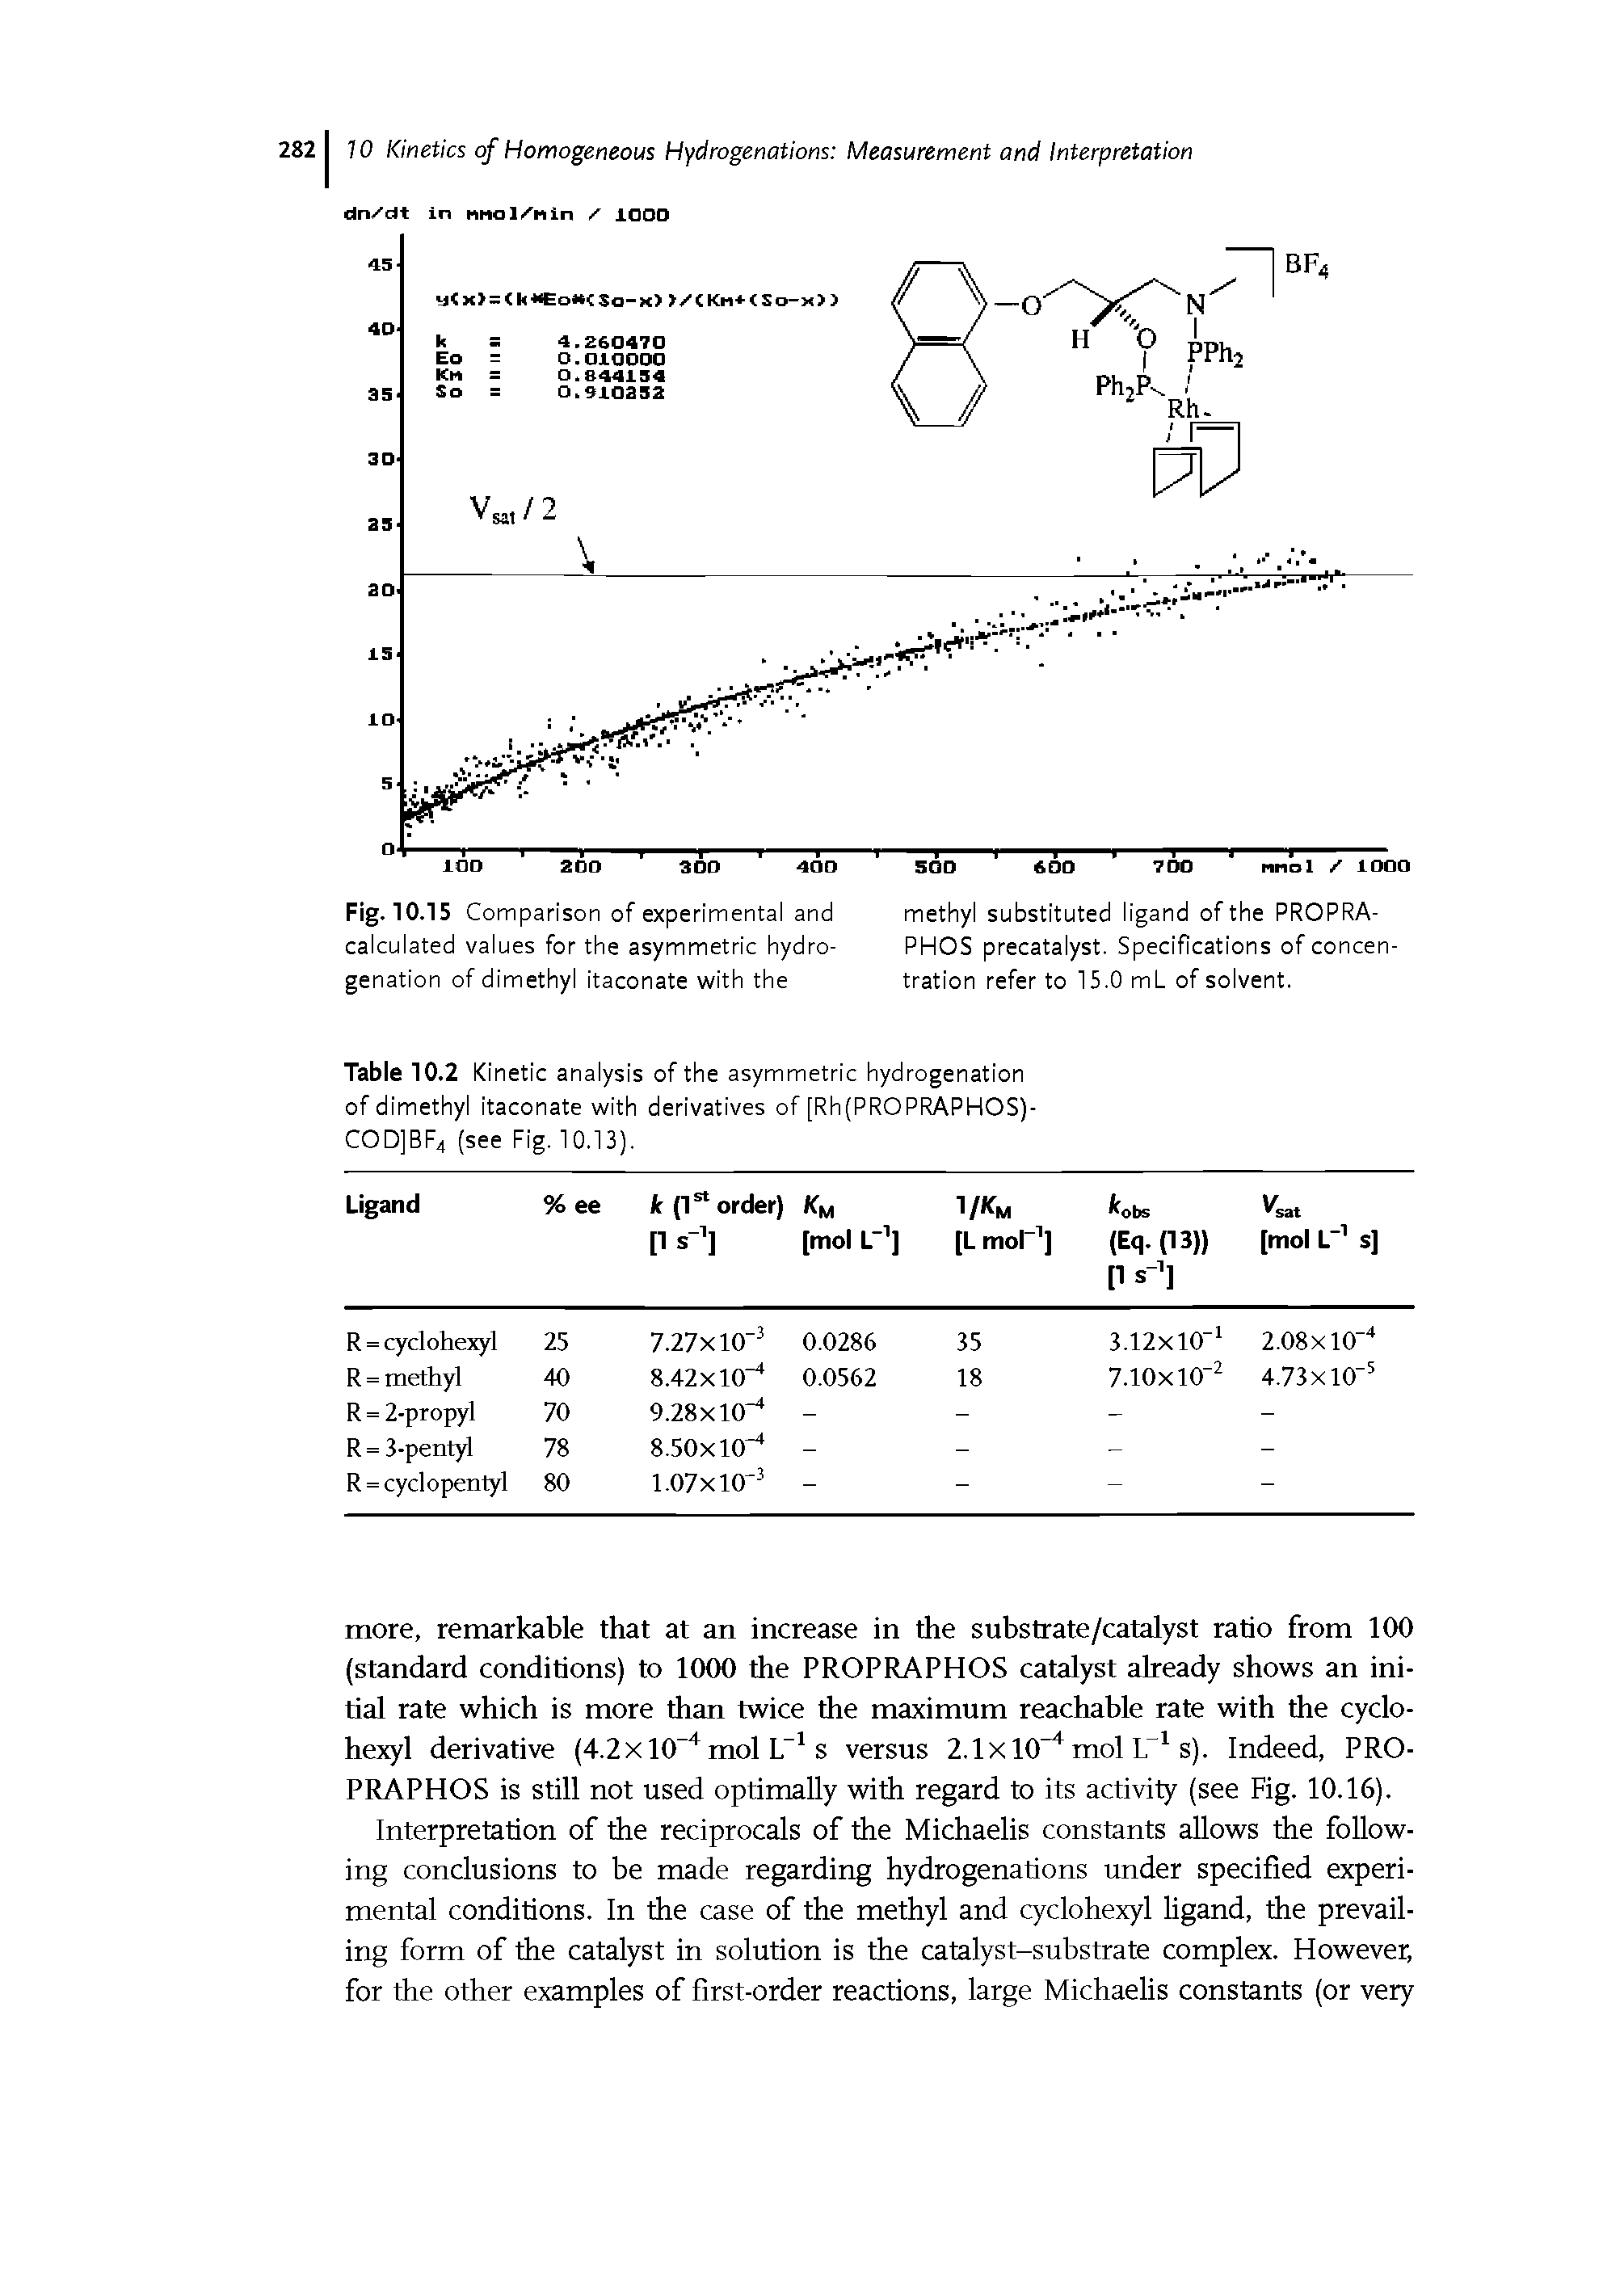 Table 10.2 Kinetic analysis of the asymmetric hydrogenation of dimethyl itaconate with derivatives of [Rh(PROPRAPHOS)-COD]BF4 (see Fig. 10.13).